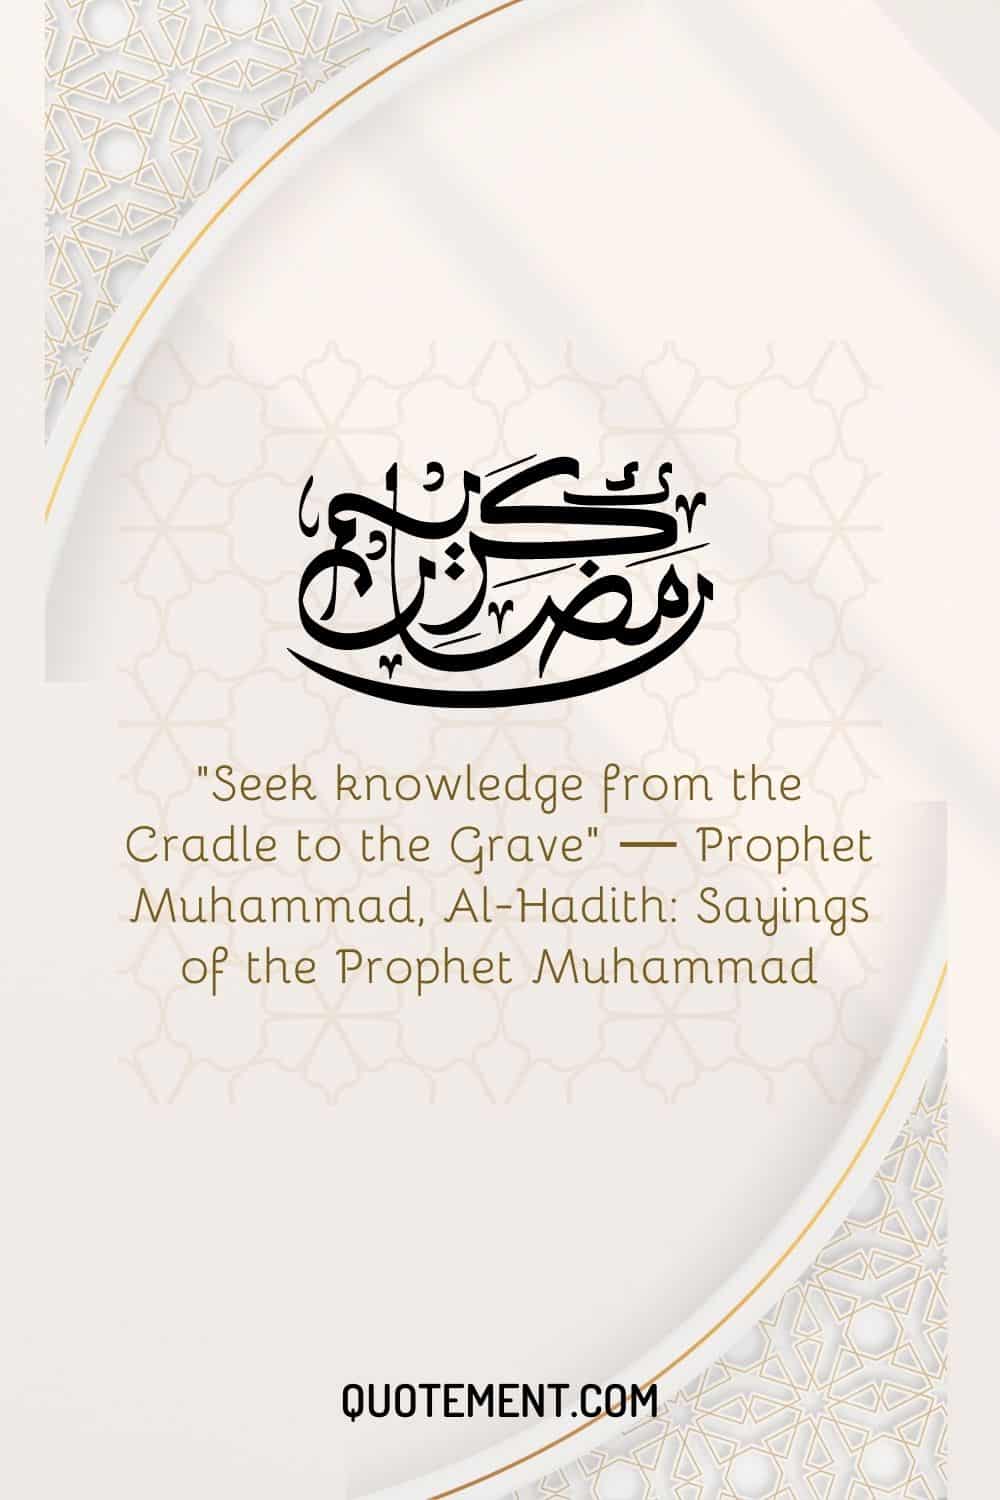 Seek knowledge from the Cradle to the Grave